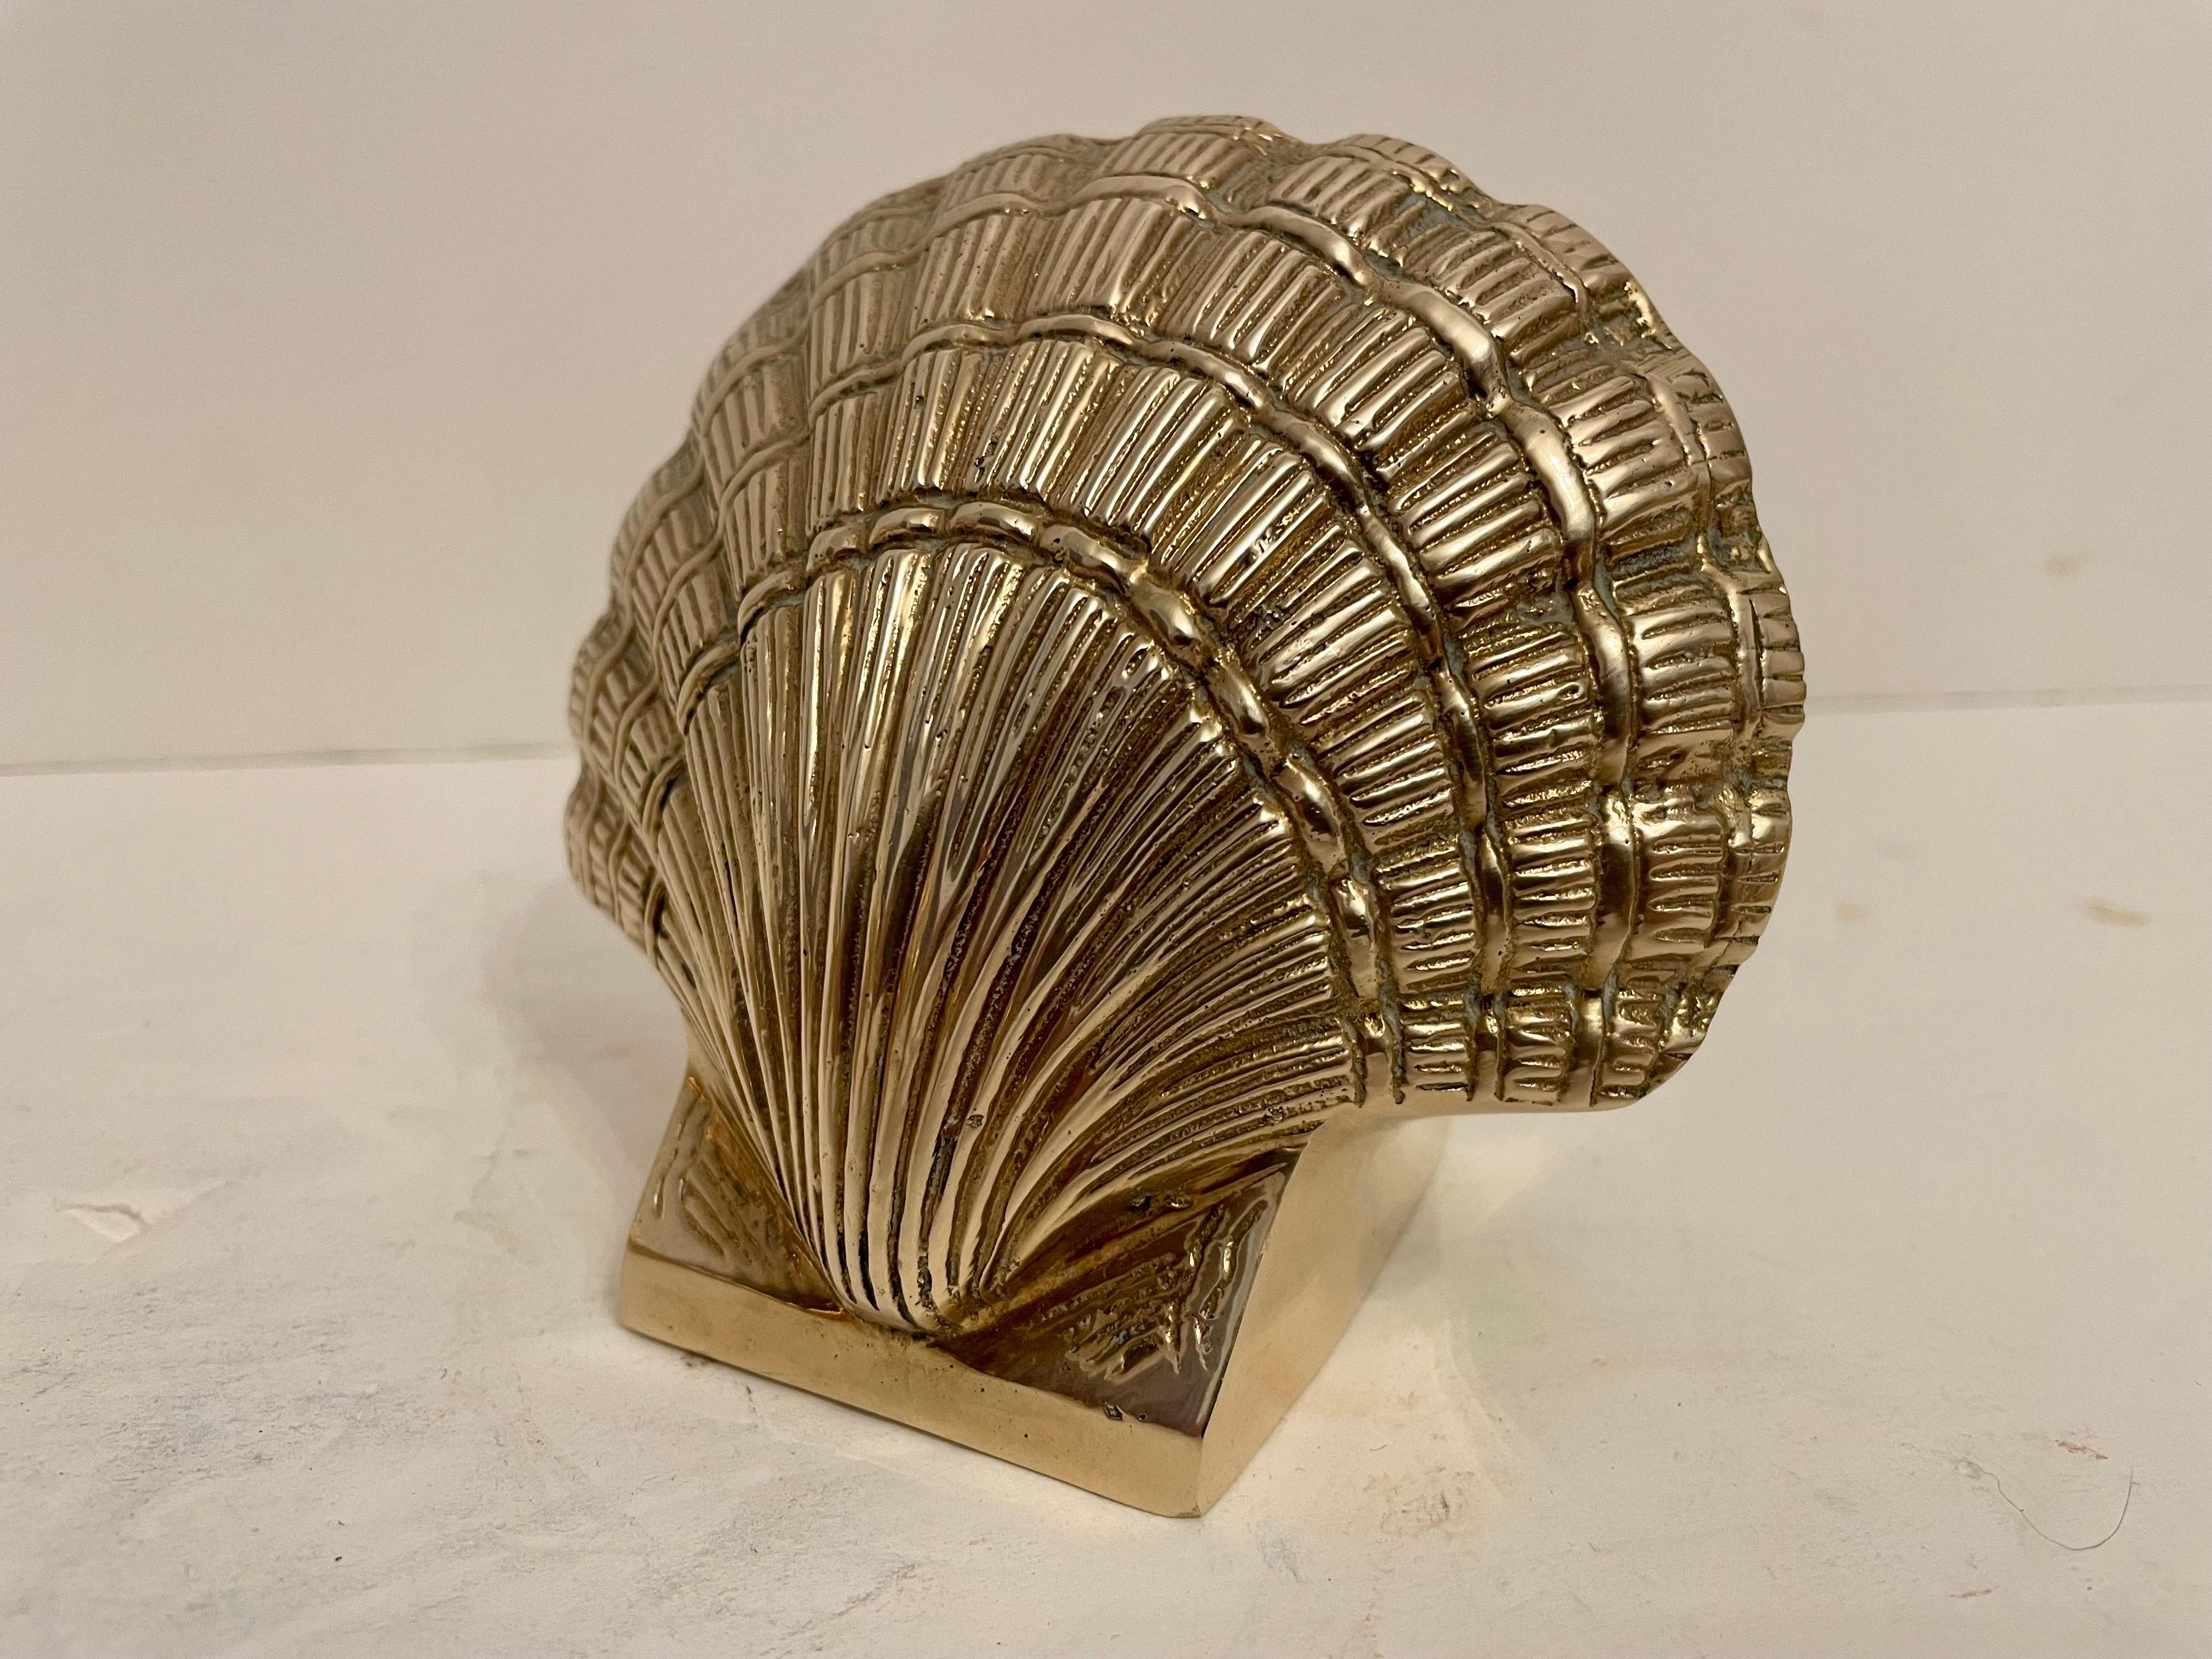 Pair solid brass clam shell seashell bookends. Good condition. Ready to use.